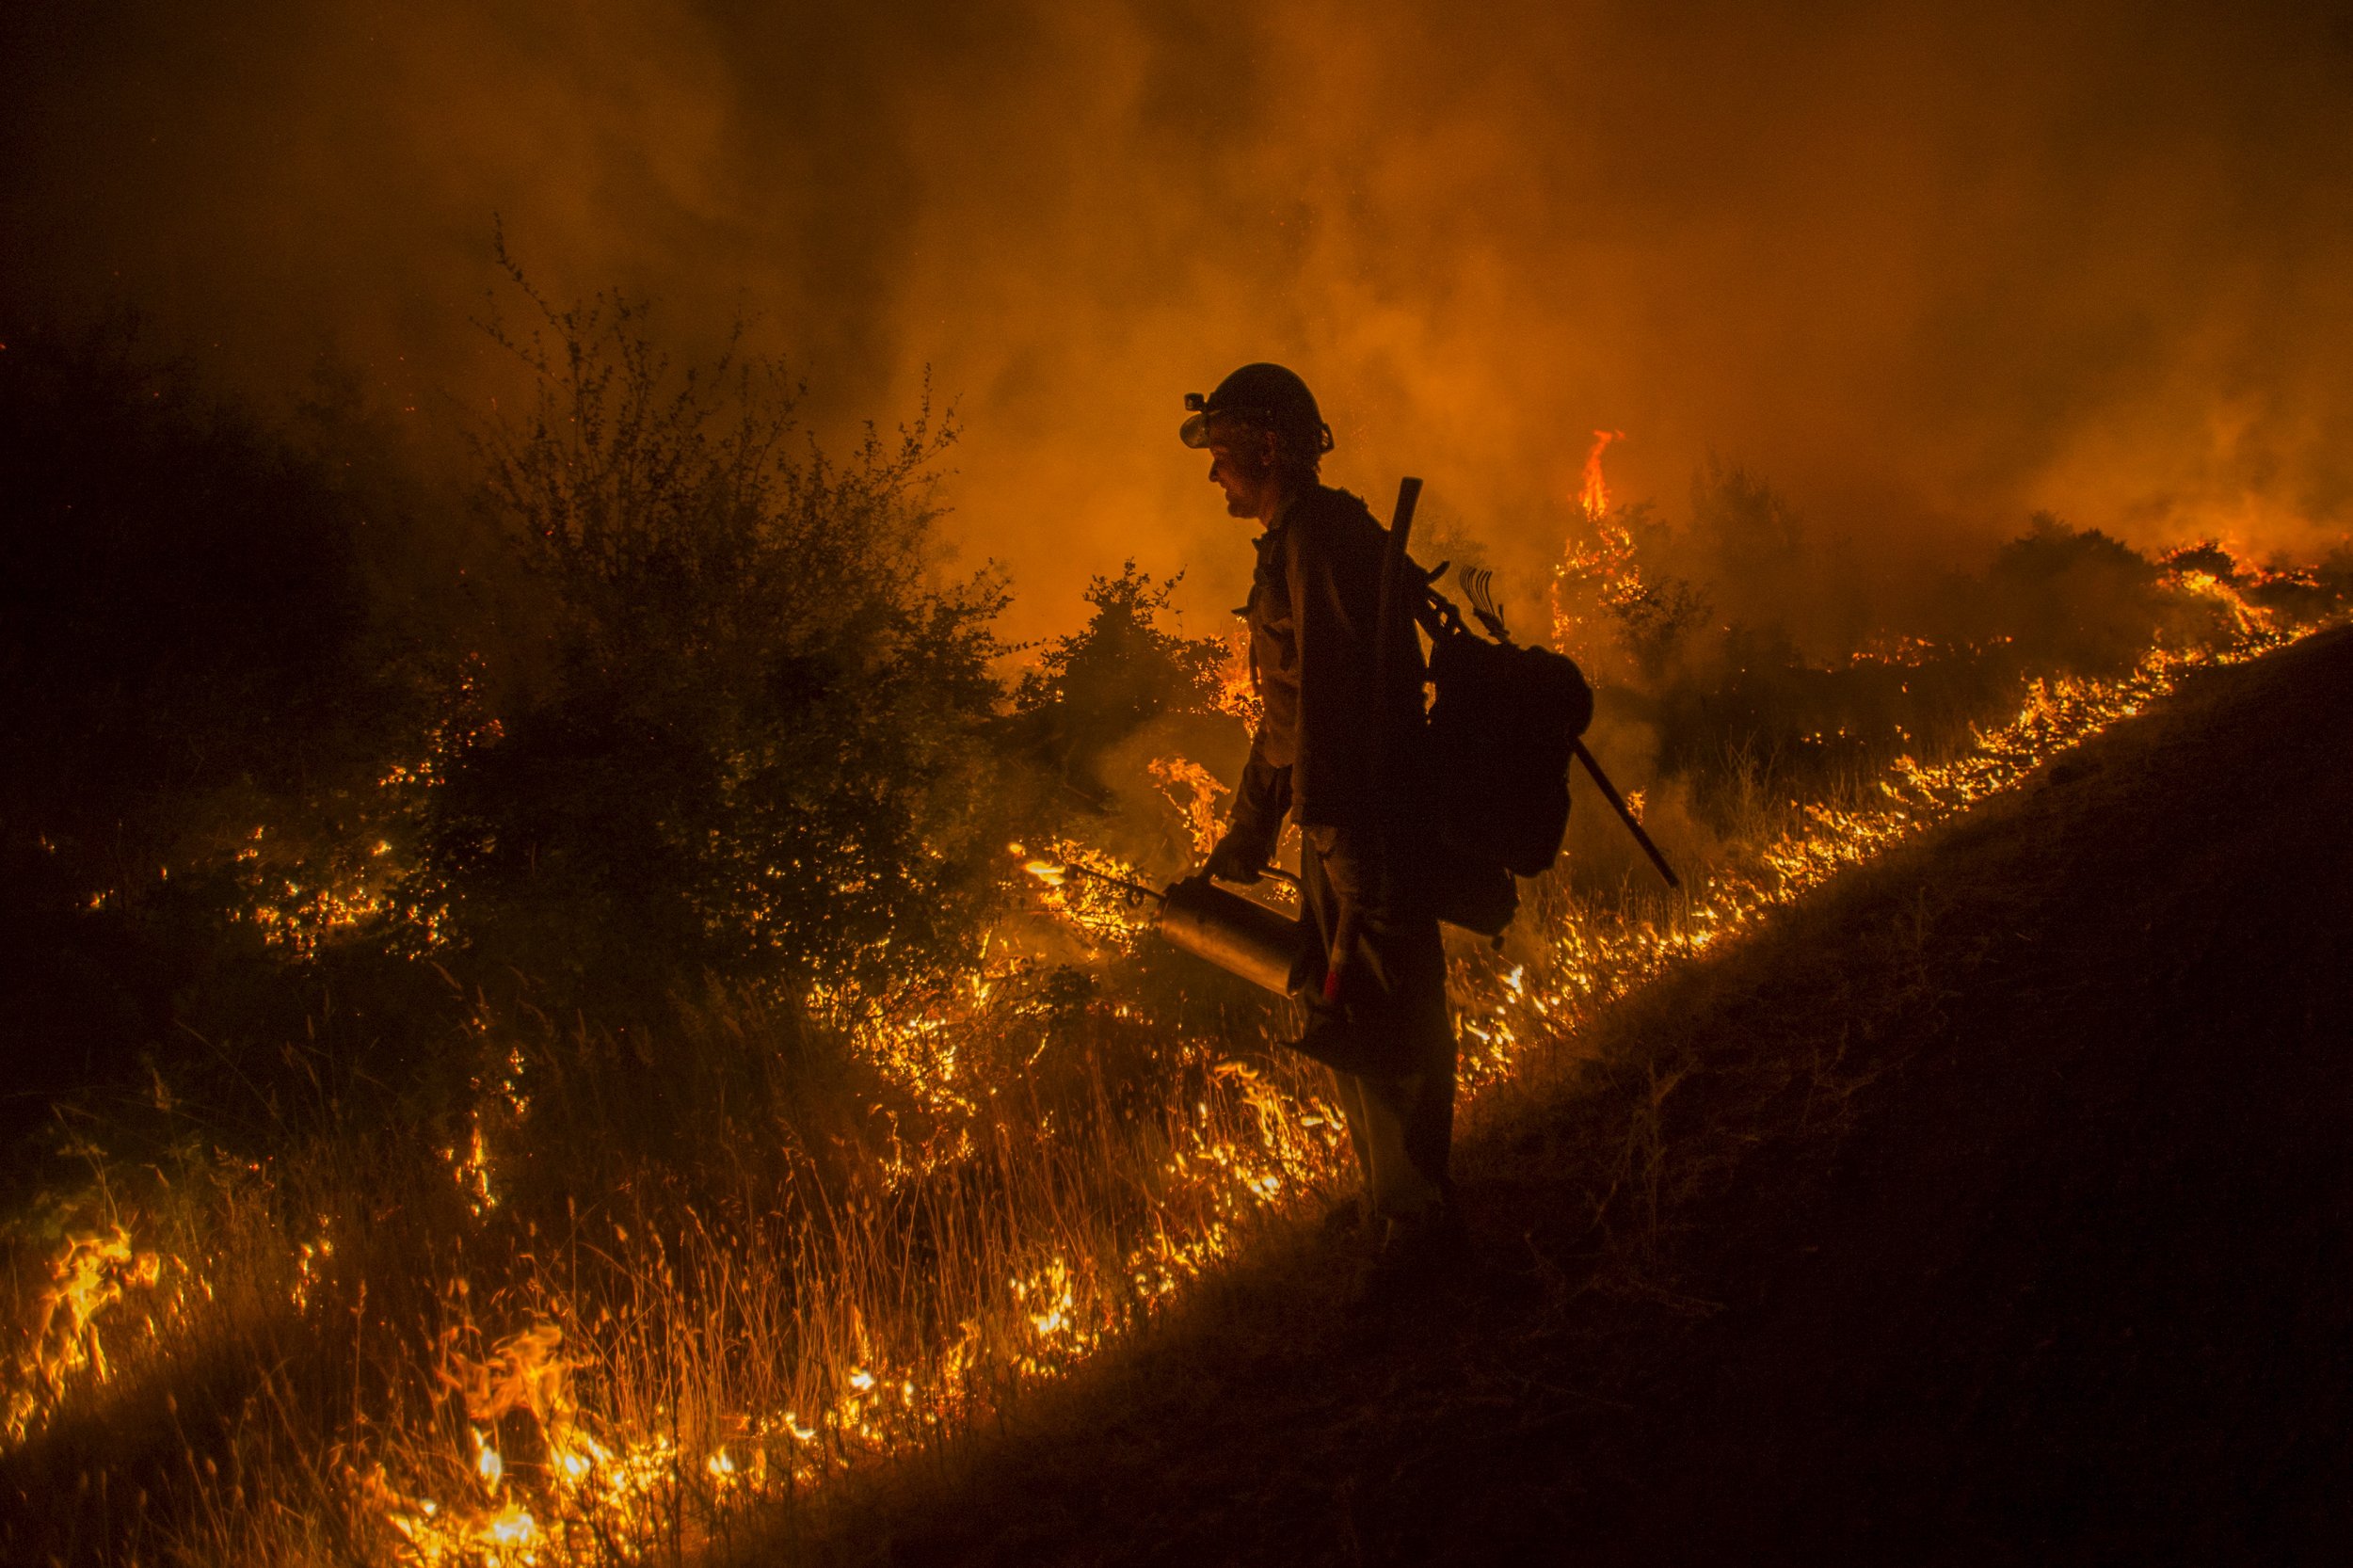 California Wildfires to get Worse with Drought